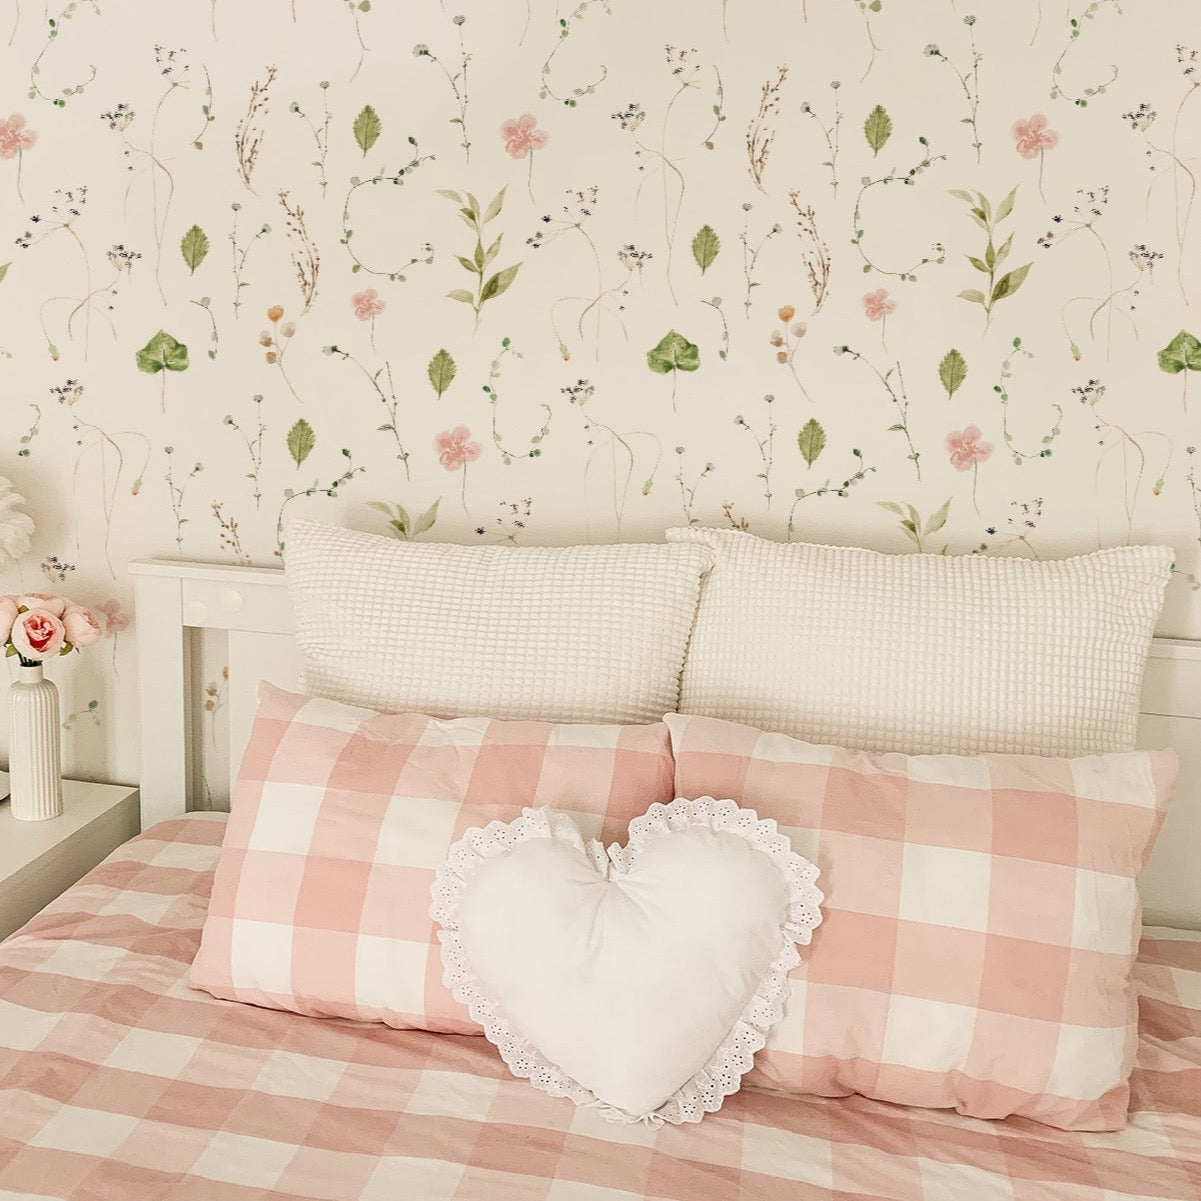 A cozy and romantic bedroom scene highlighted by the Modern Watercolour Floral Wallpaper in Dusty Pink on the walls. The wallpaper's soft pastel flowers and leaves create a gentle and tranquil ambiance. The room is styled with a checkered pink and white bedding, decorative pillows, and fresh flowers, emphasizing a feminine and dreamy interior design.